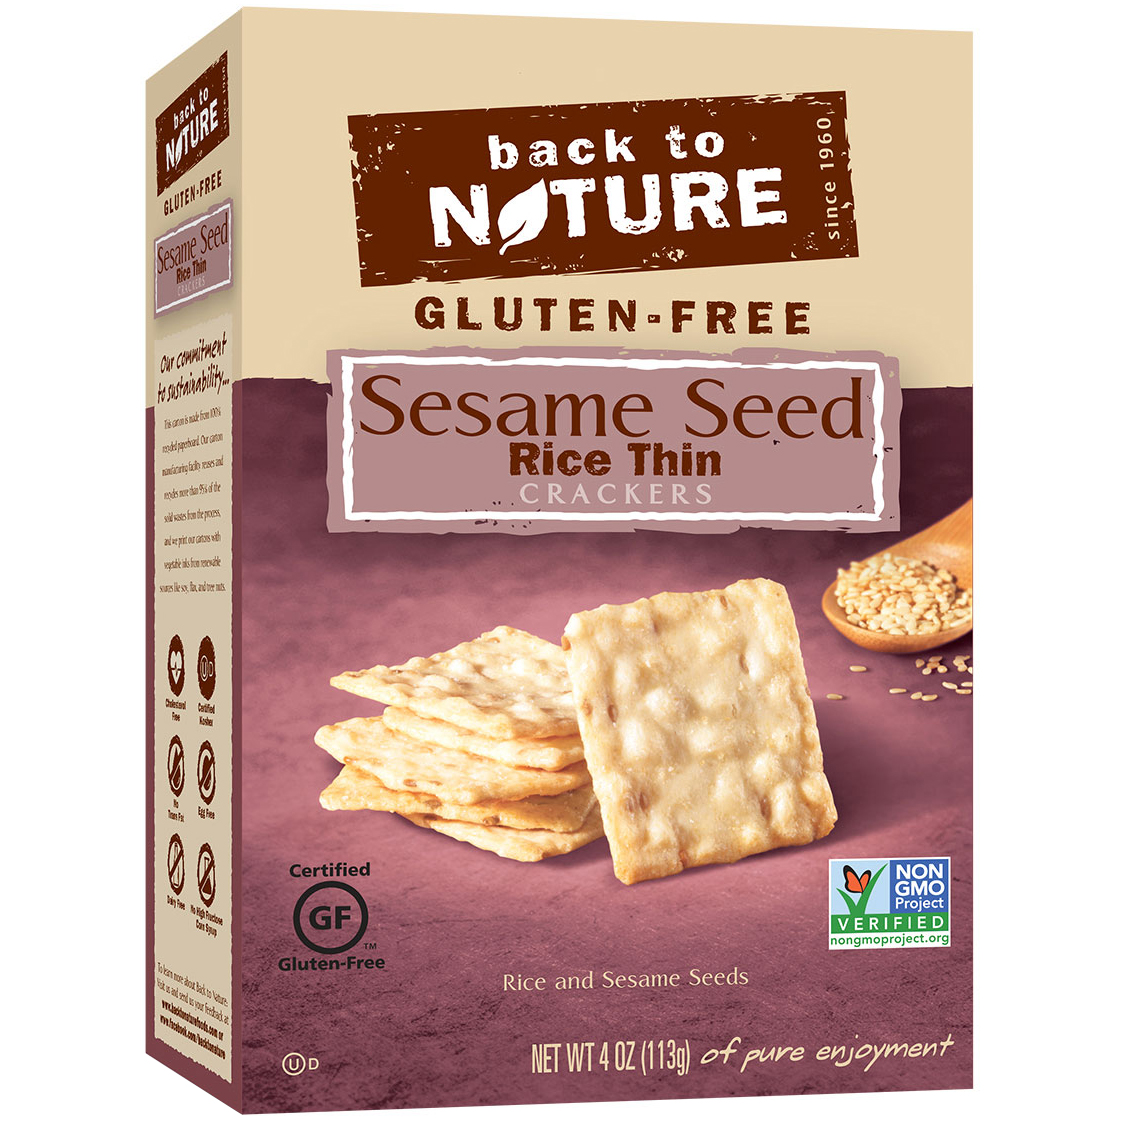 BACK TO NATURE - CRACKERS - NON GMO - GLUTEN FREE - (Sesame Seed | Rice Thin) - 4oz	